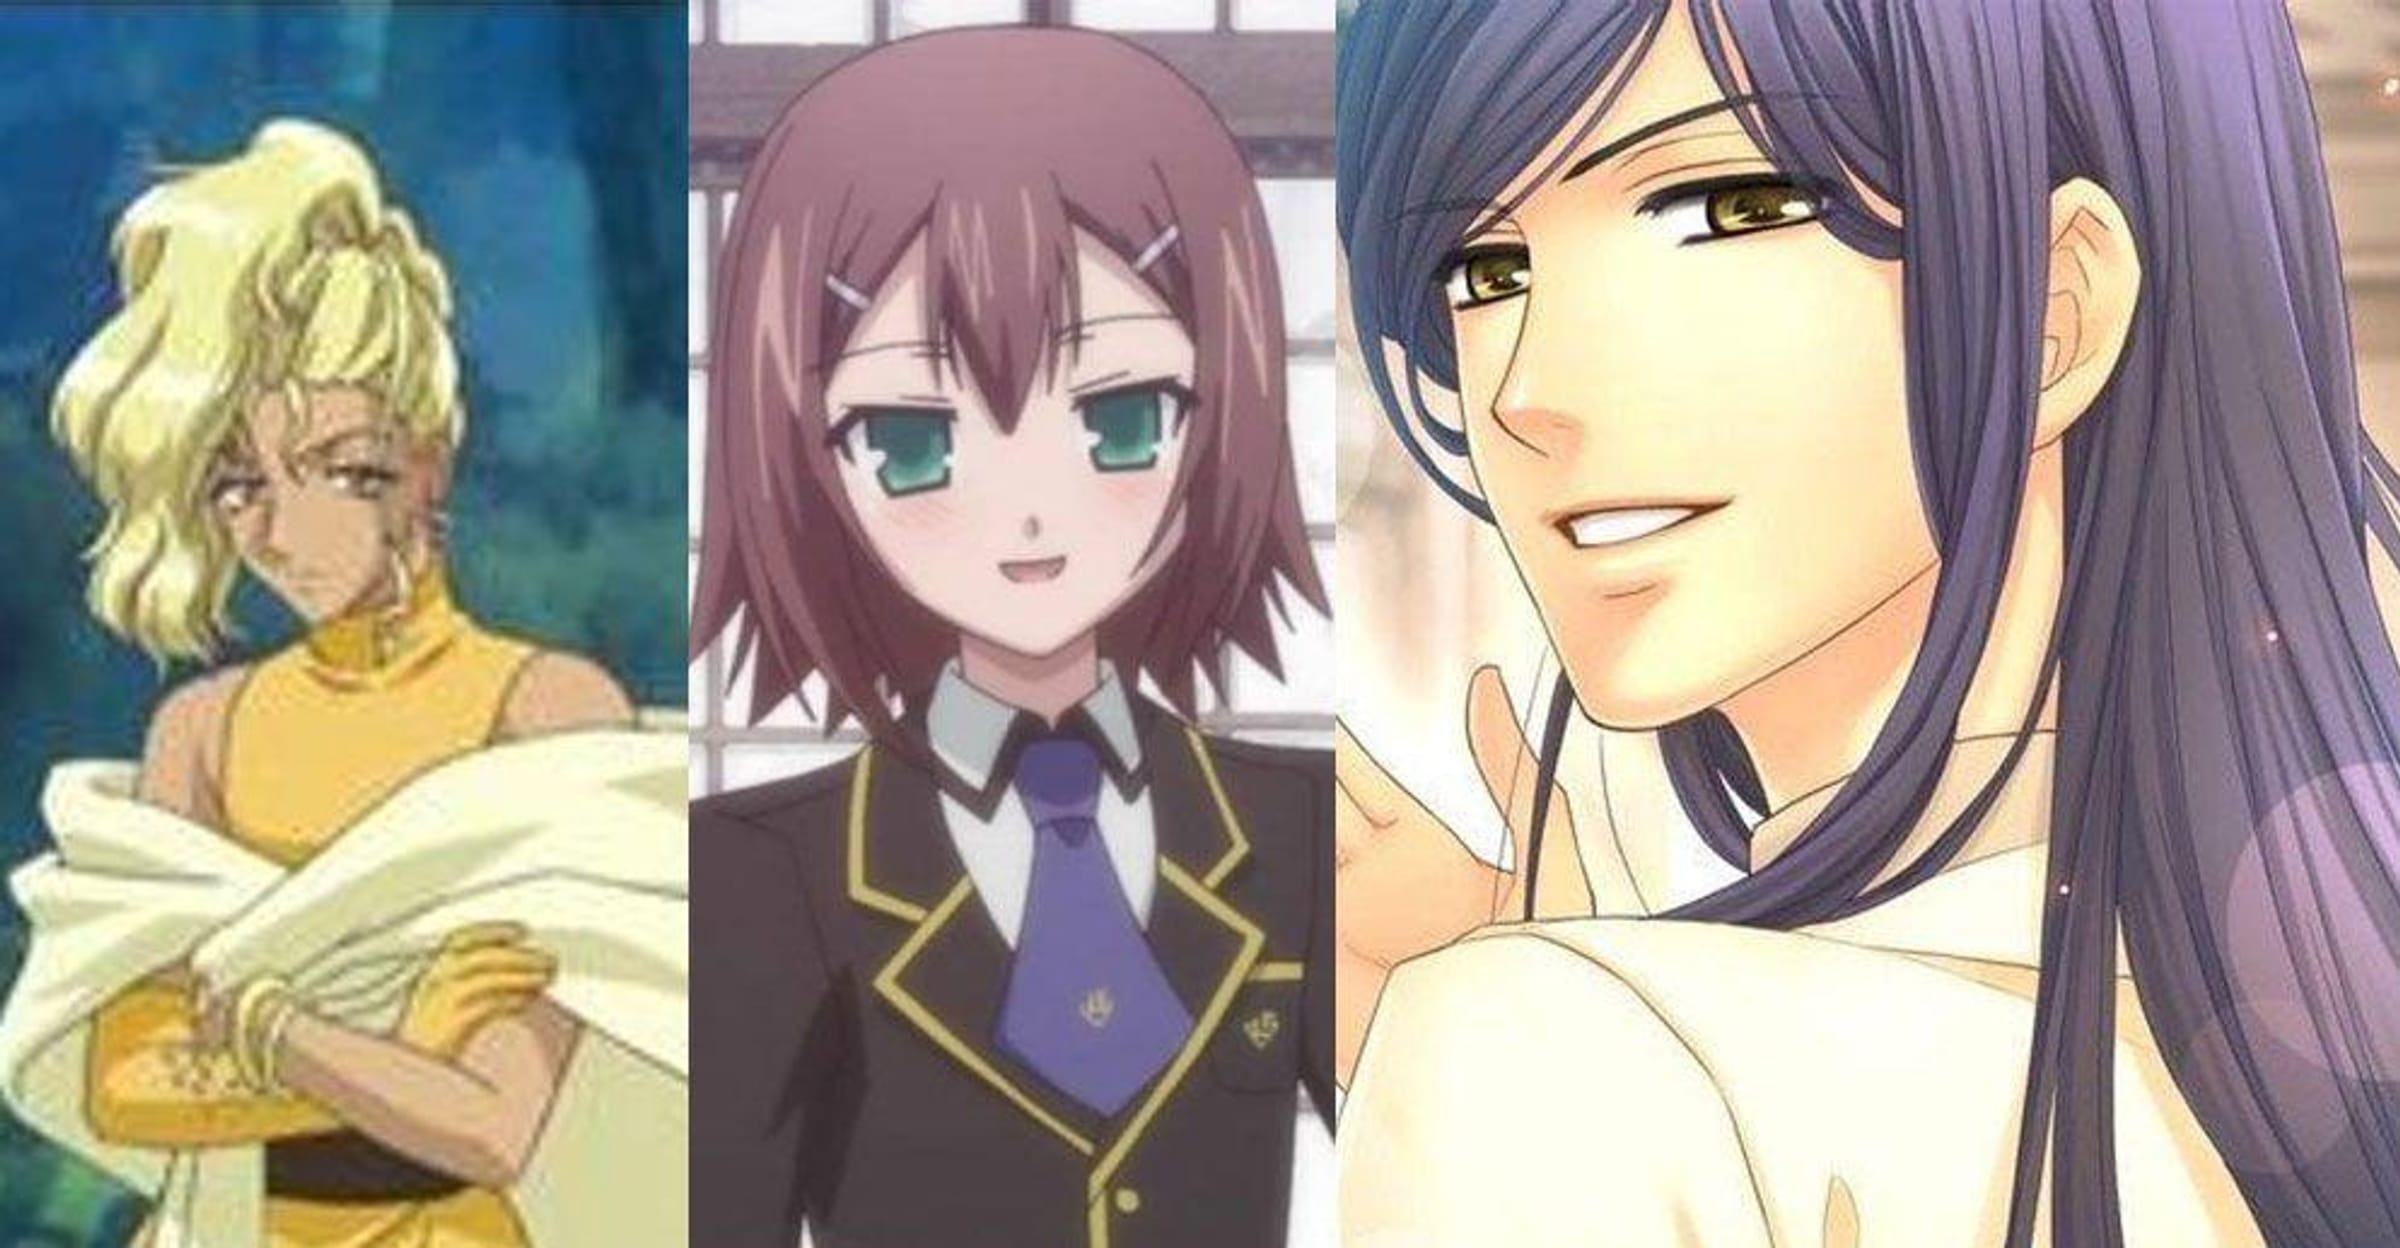 Which male anime characters are popular around girls? - Quora